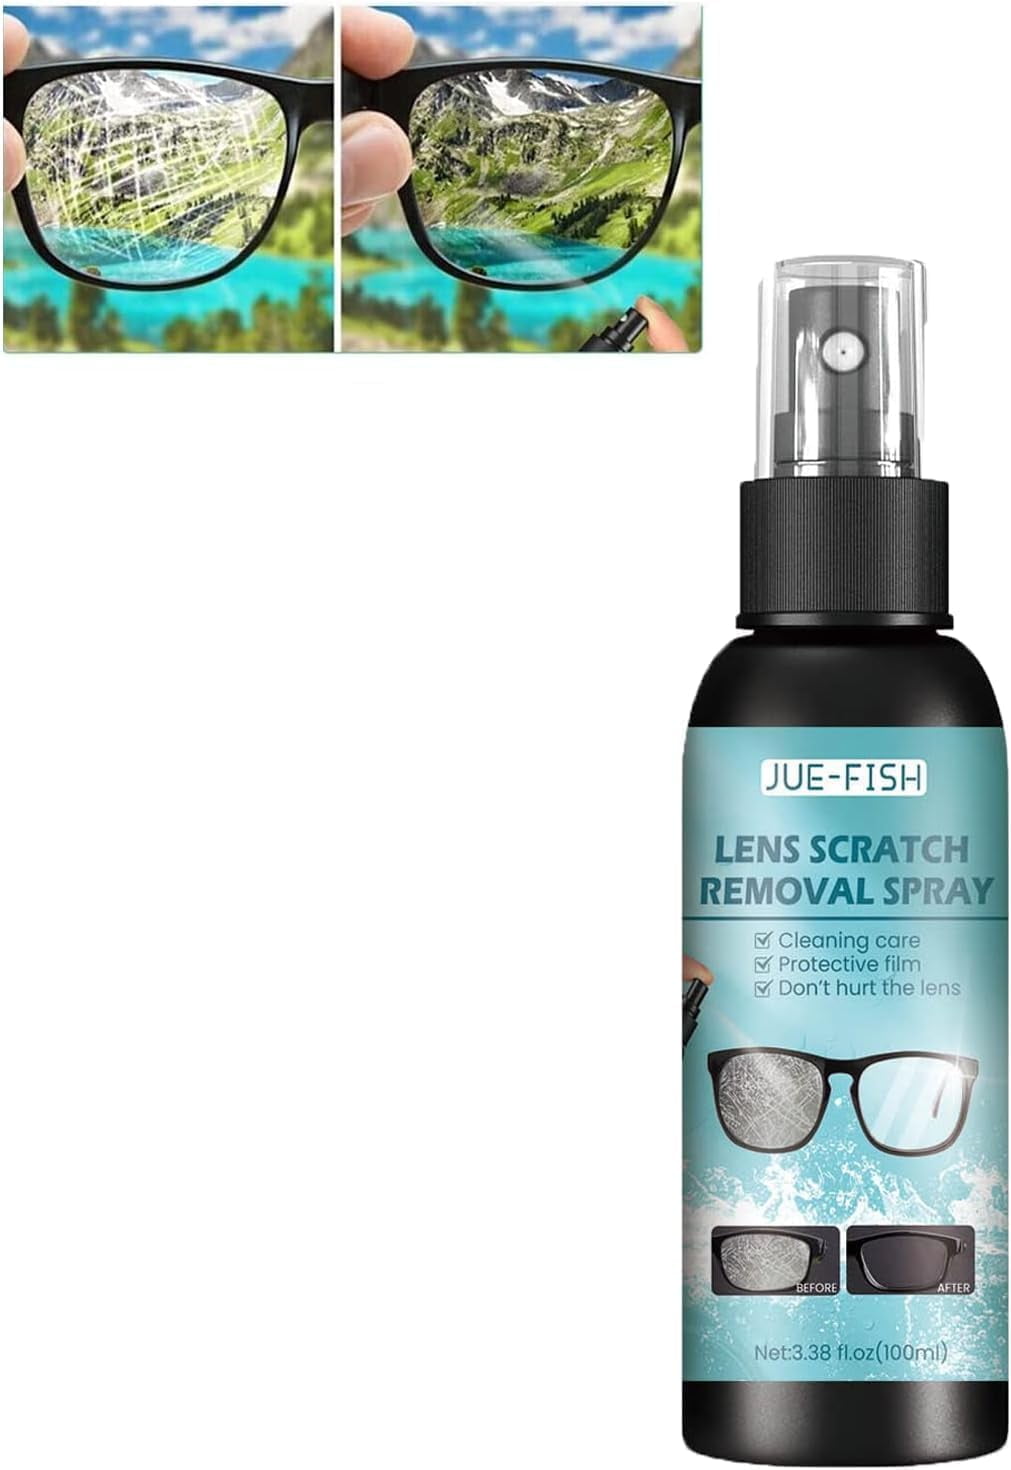  New Lens Scratch Removal Spray,Eye Glass Cleaner,Camera Lens  Cleaner,Glass Scratch Repair Fluid,Lens Scratch Remover,Glasses Lens  Cleaning Spray for Sunglasses Screen Cleaning Tool (1 pc) : Health &  Household